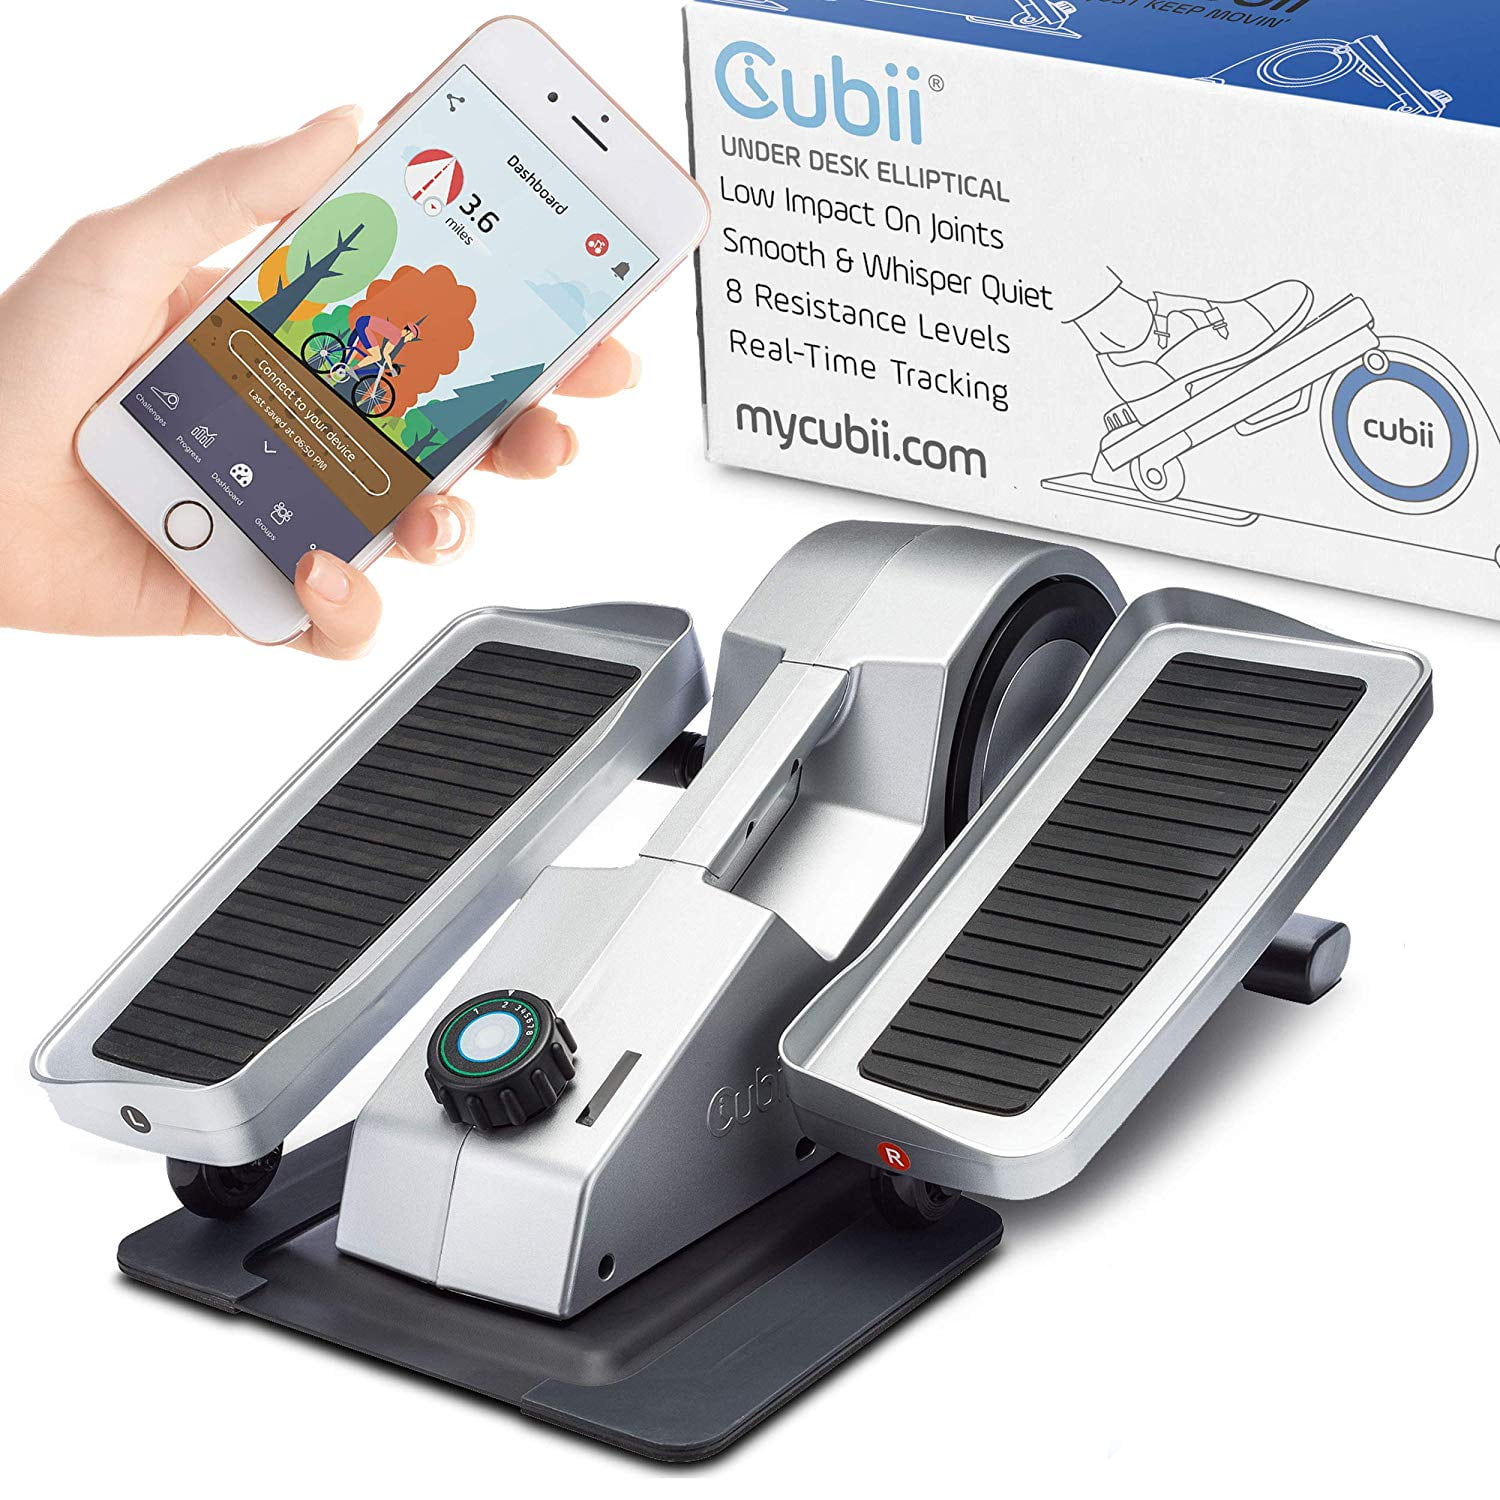 - Seated Under-Desk Elliptical Adjustable Resistance Whisper-Quiet Get Fit While You Sit Easy to Assemble Cubii Jr Built-in Display Monitor 